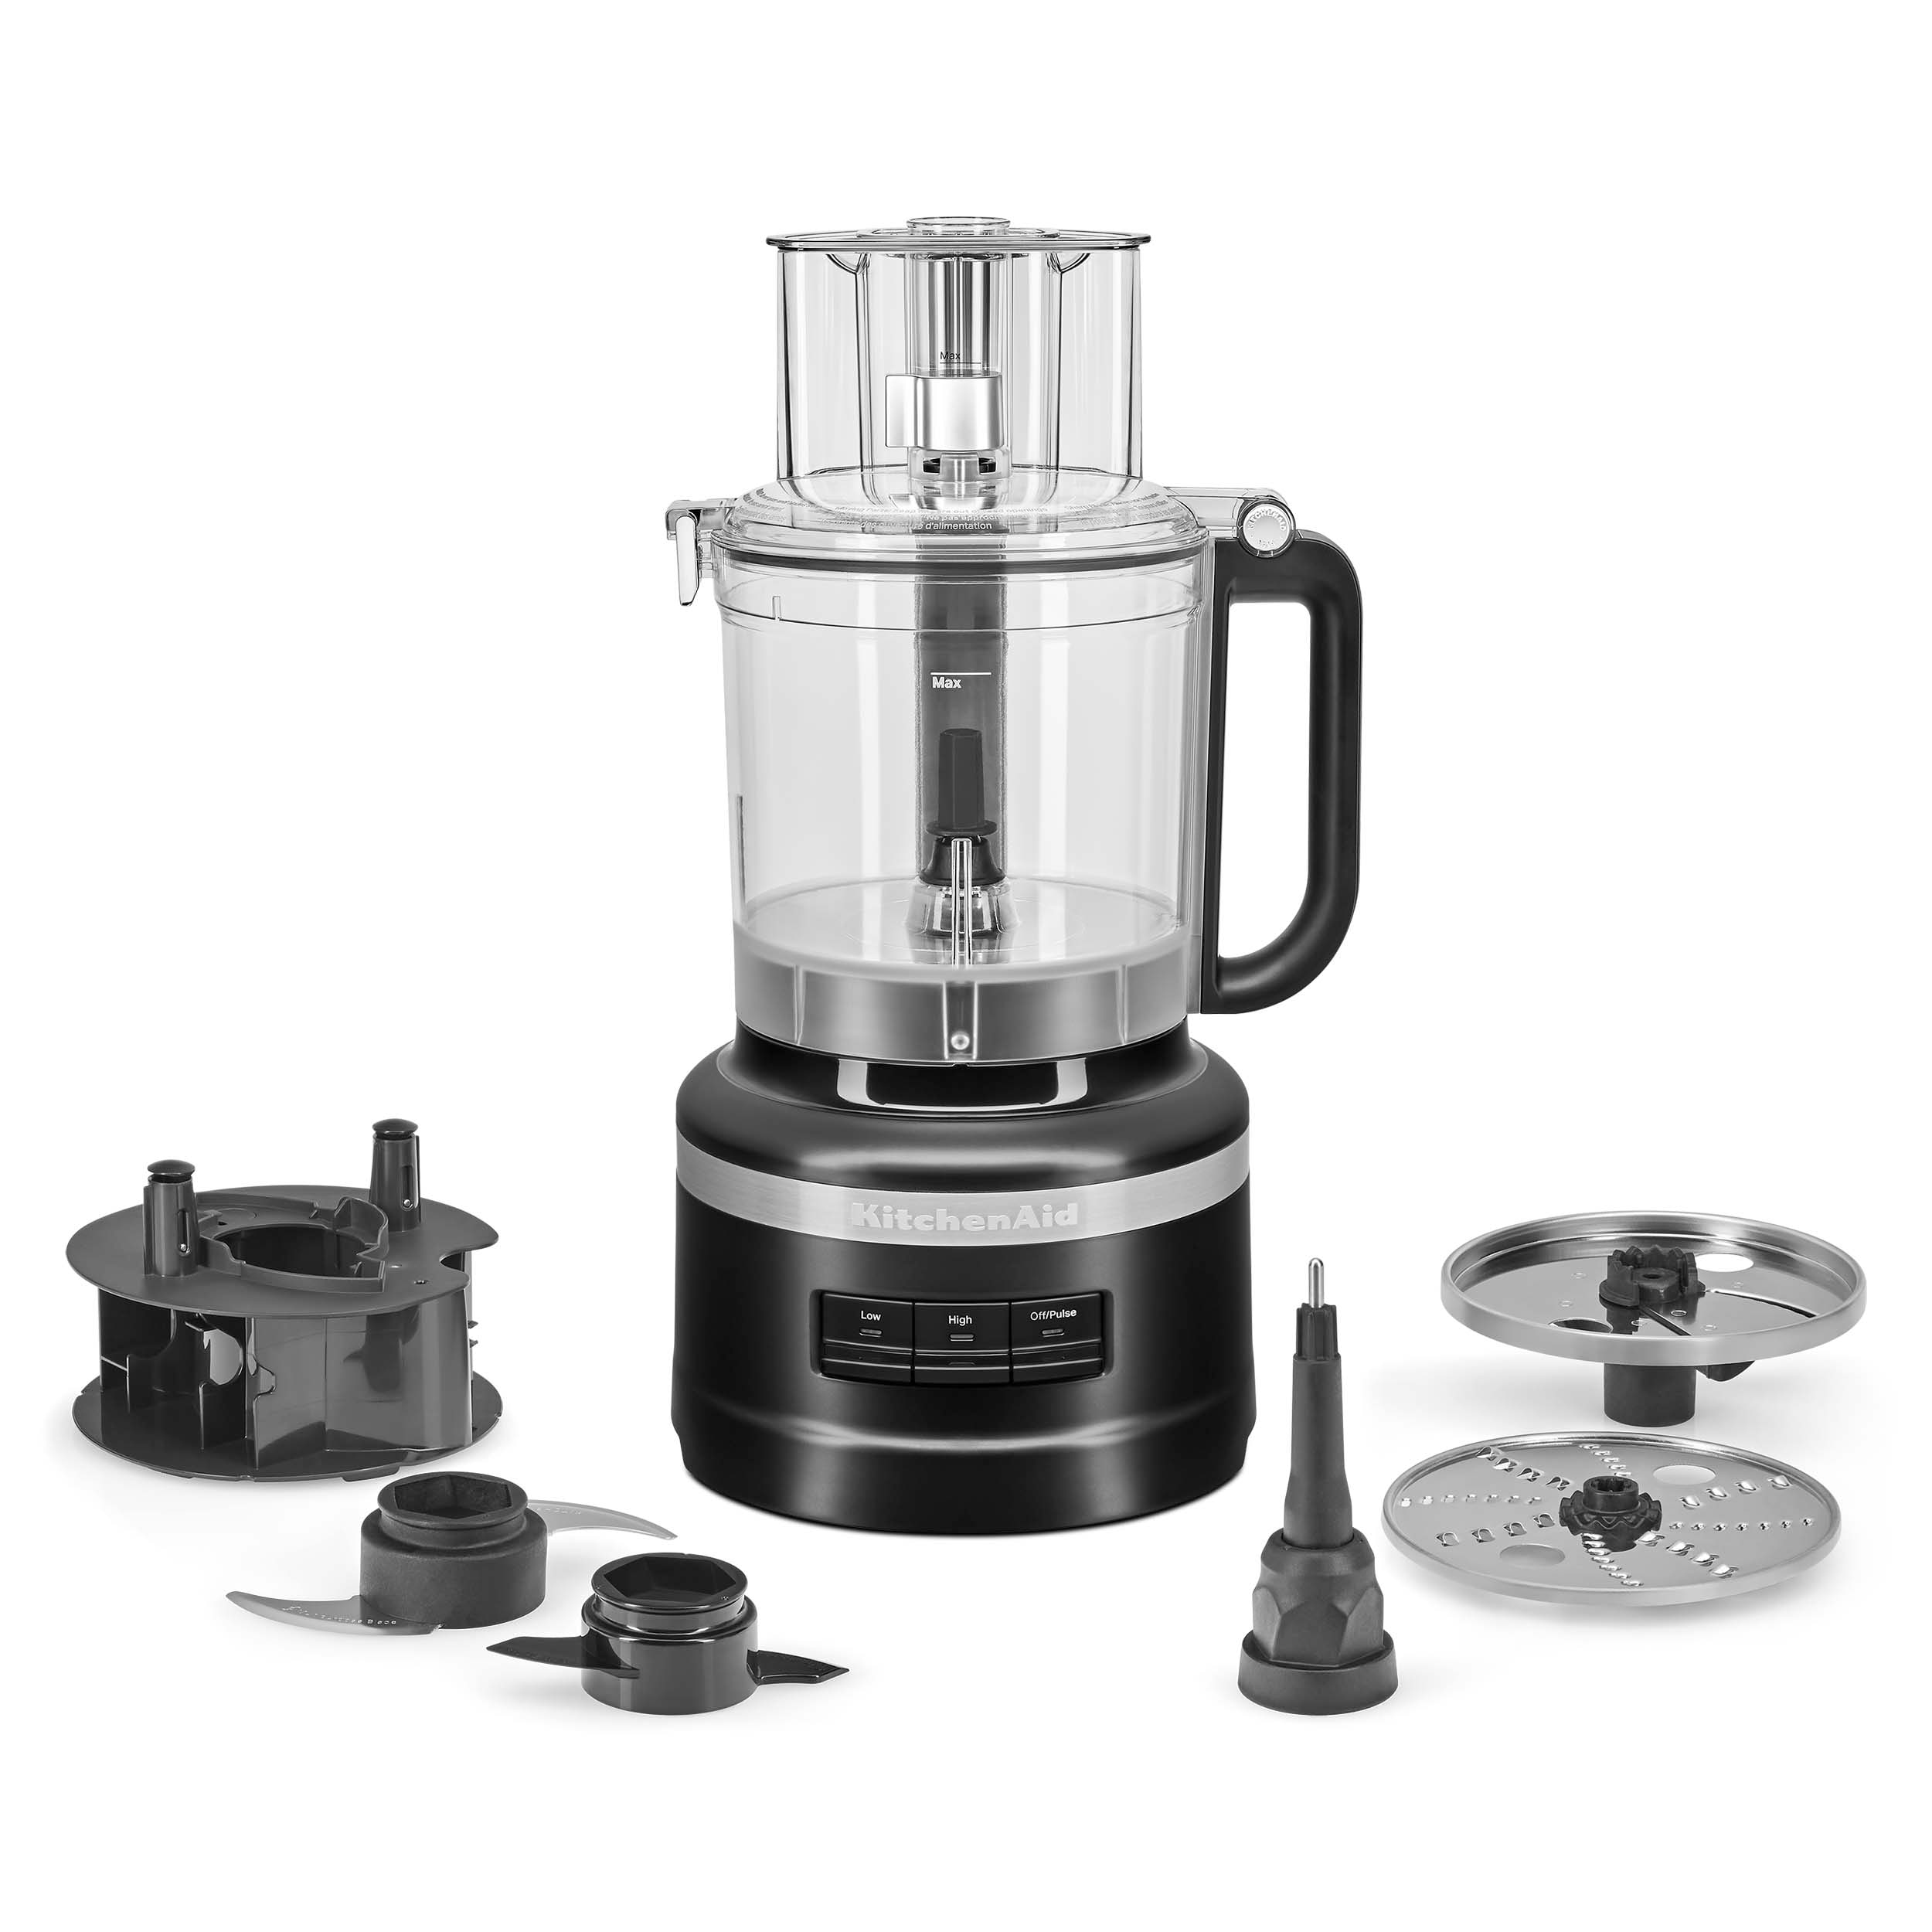 Cuisinart 9-Cup Food Processor with Continuous Feed